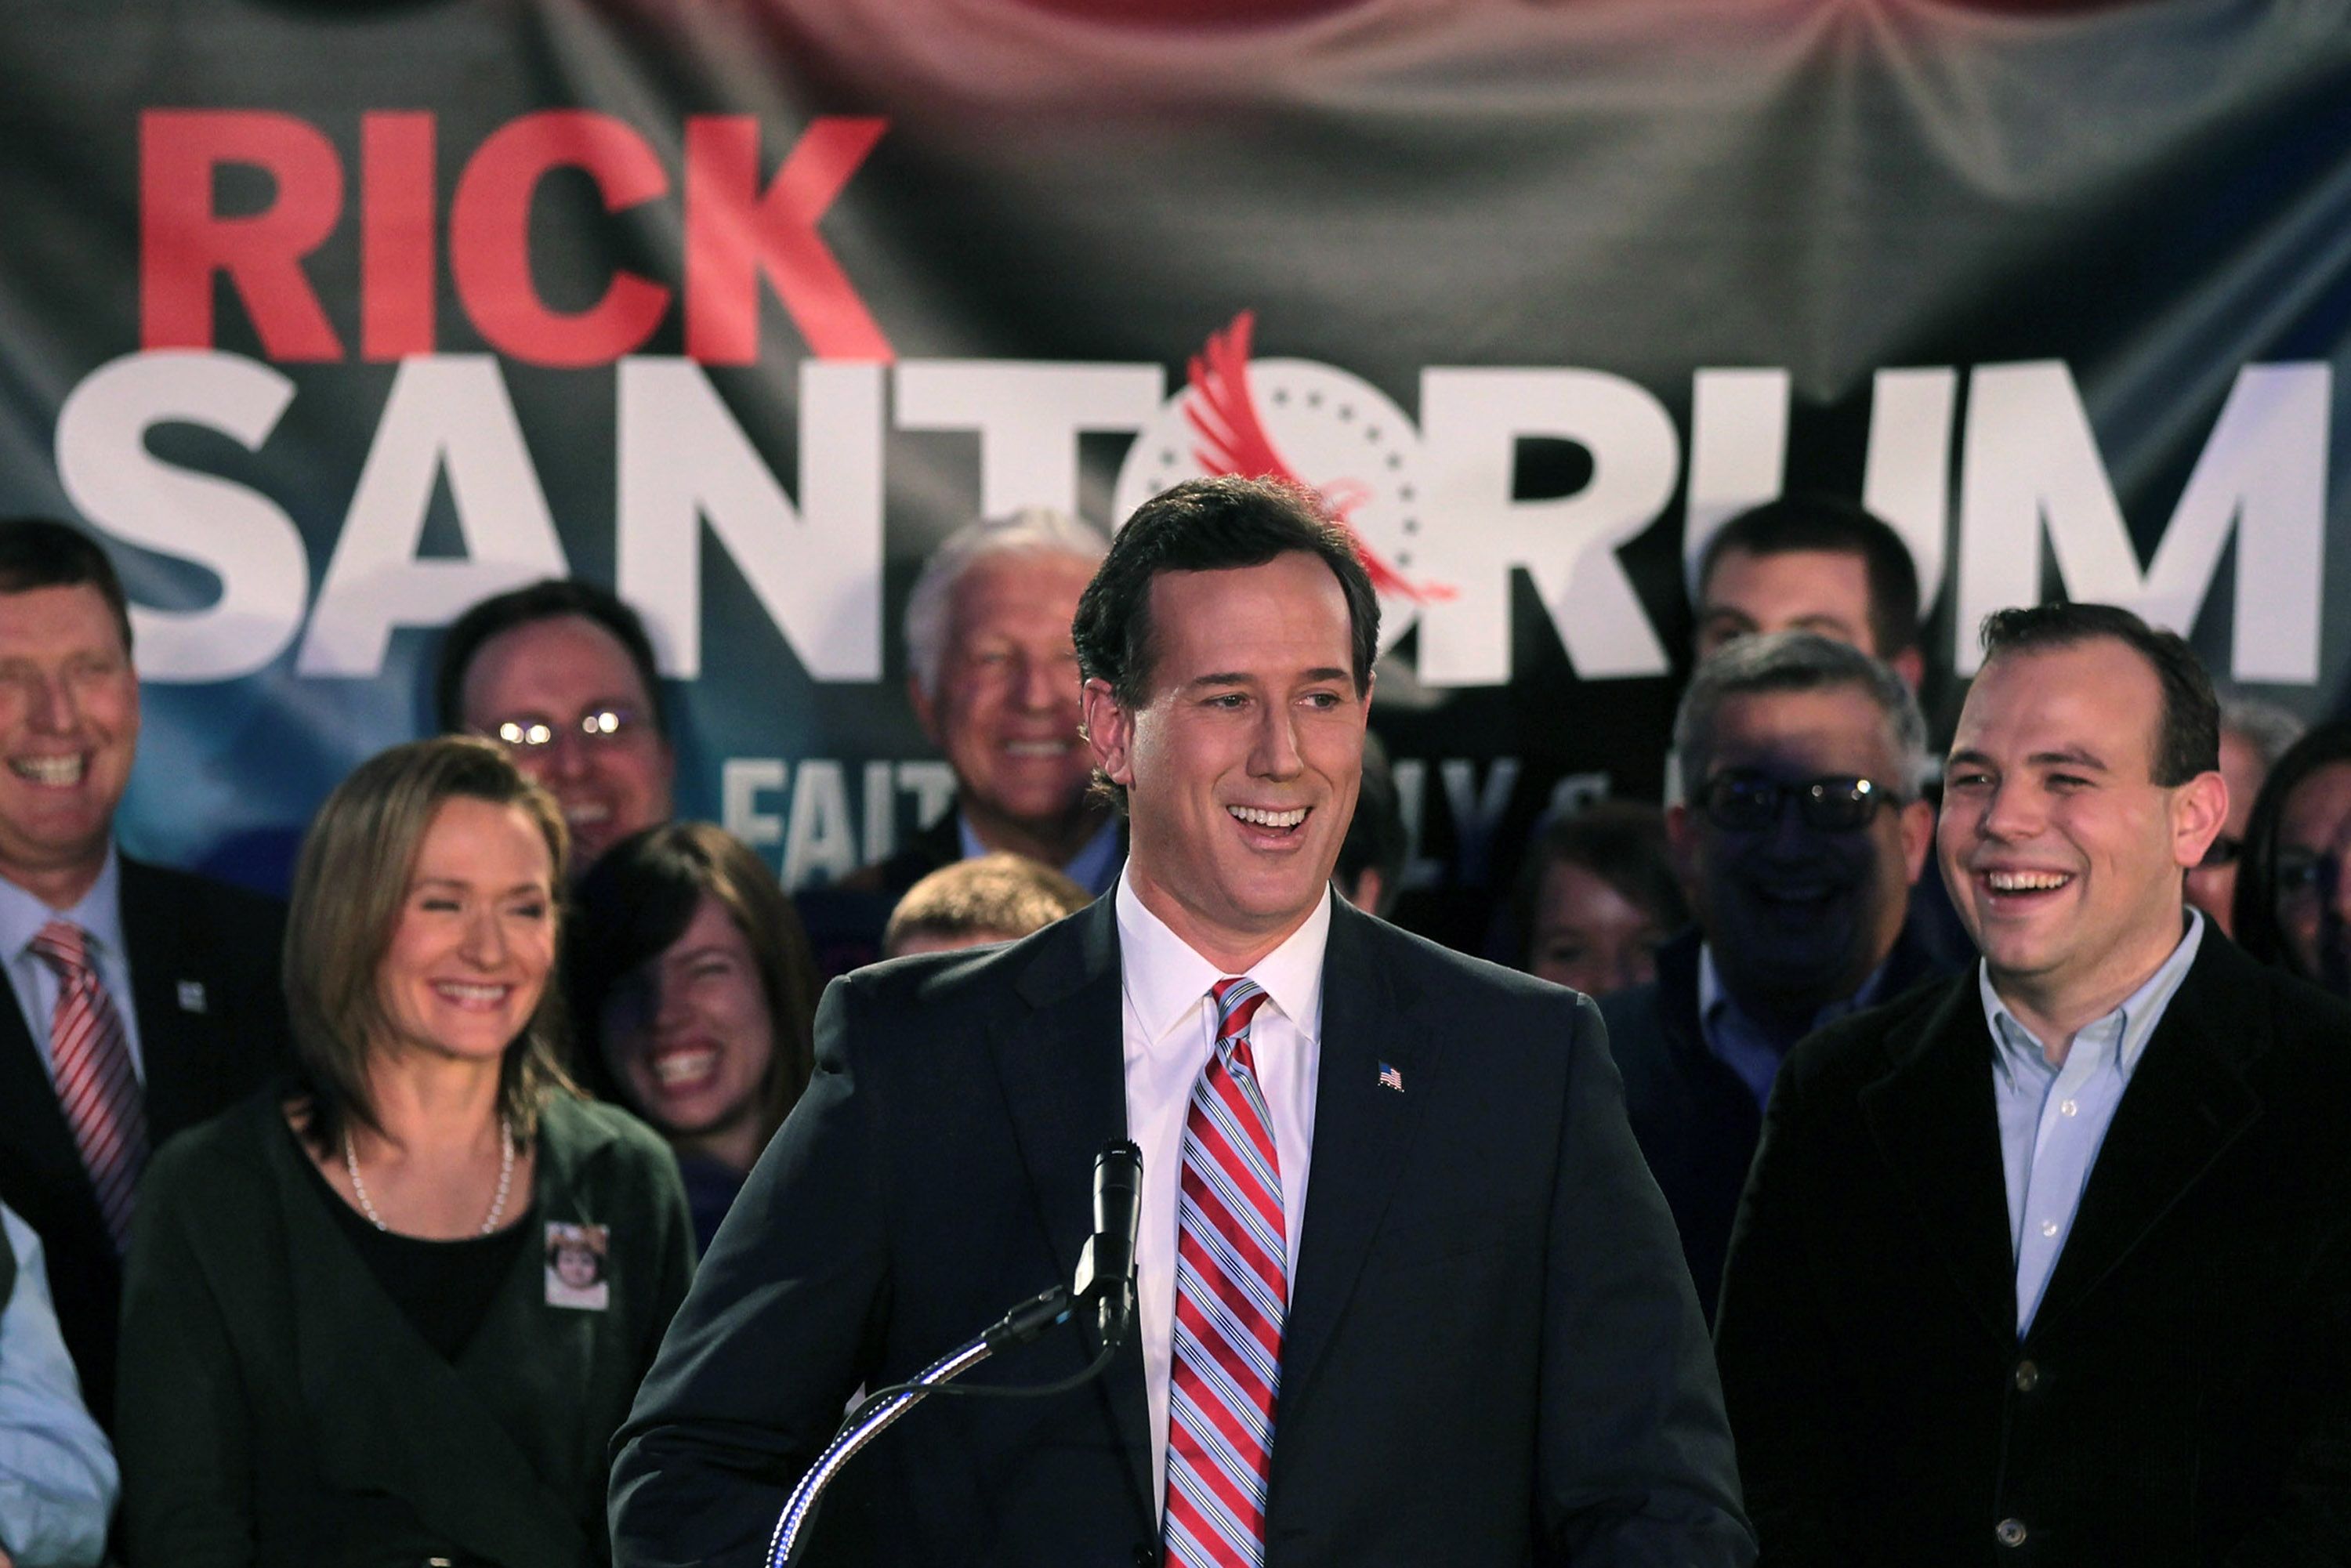 Rick Santorum stands at a microphone with people smiling behind him. A sign says his name in the background.